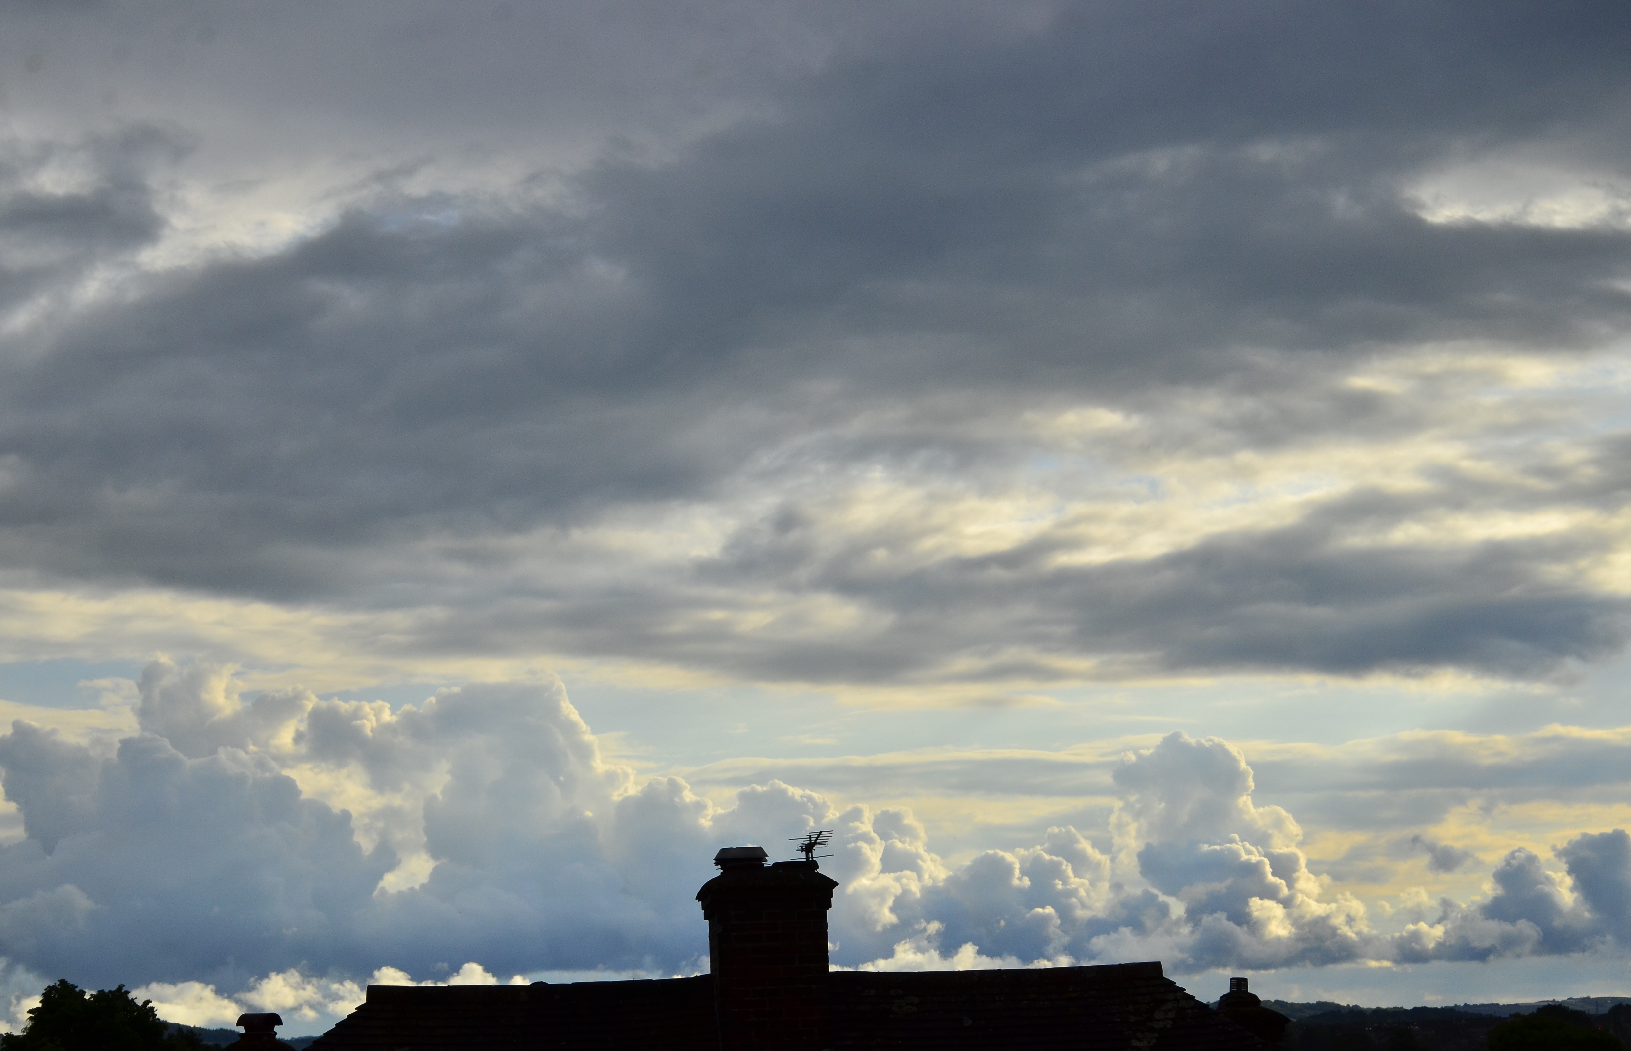 Clouds and roof silhouettes